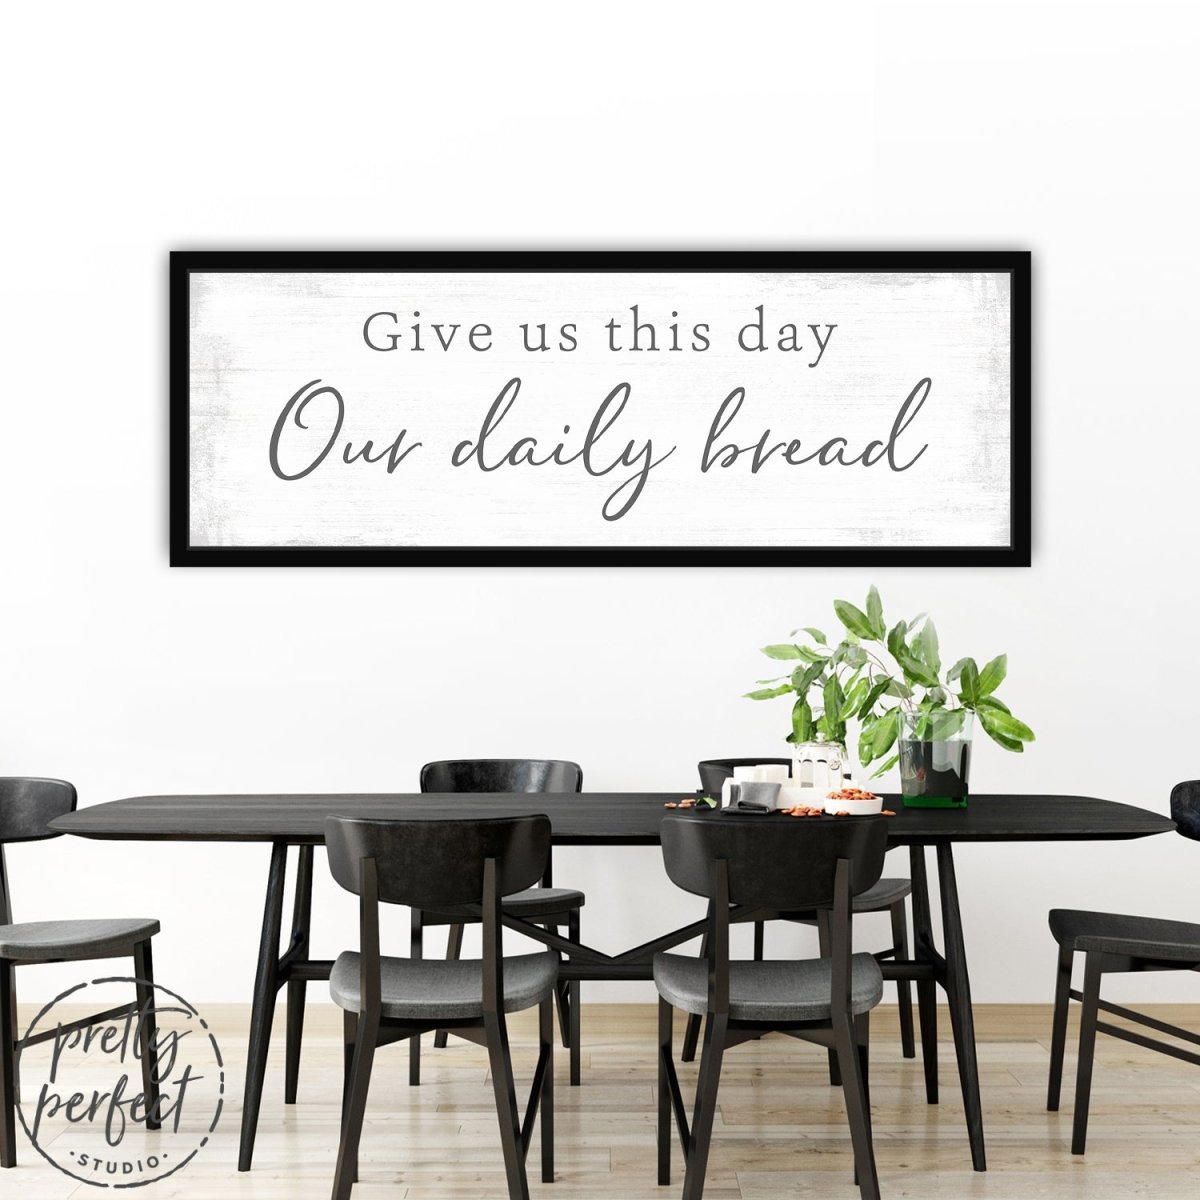 Give Us This Day Our Daily Bread Sign Above Table - Pretty Perfect Studio